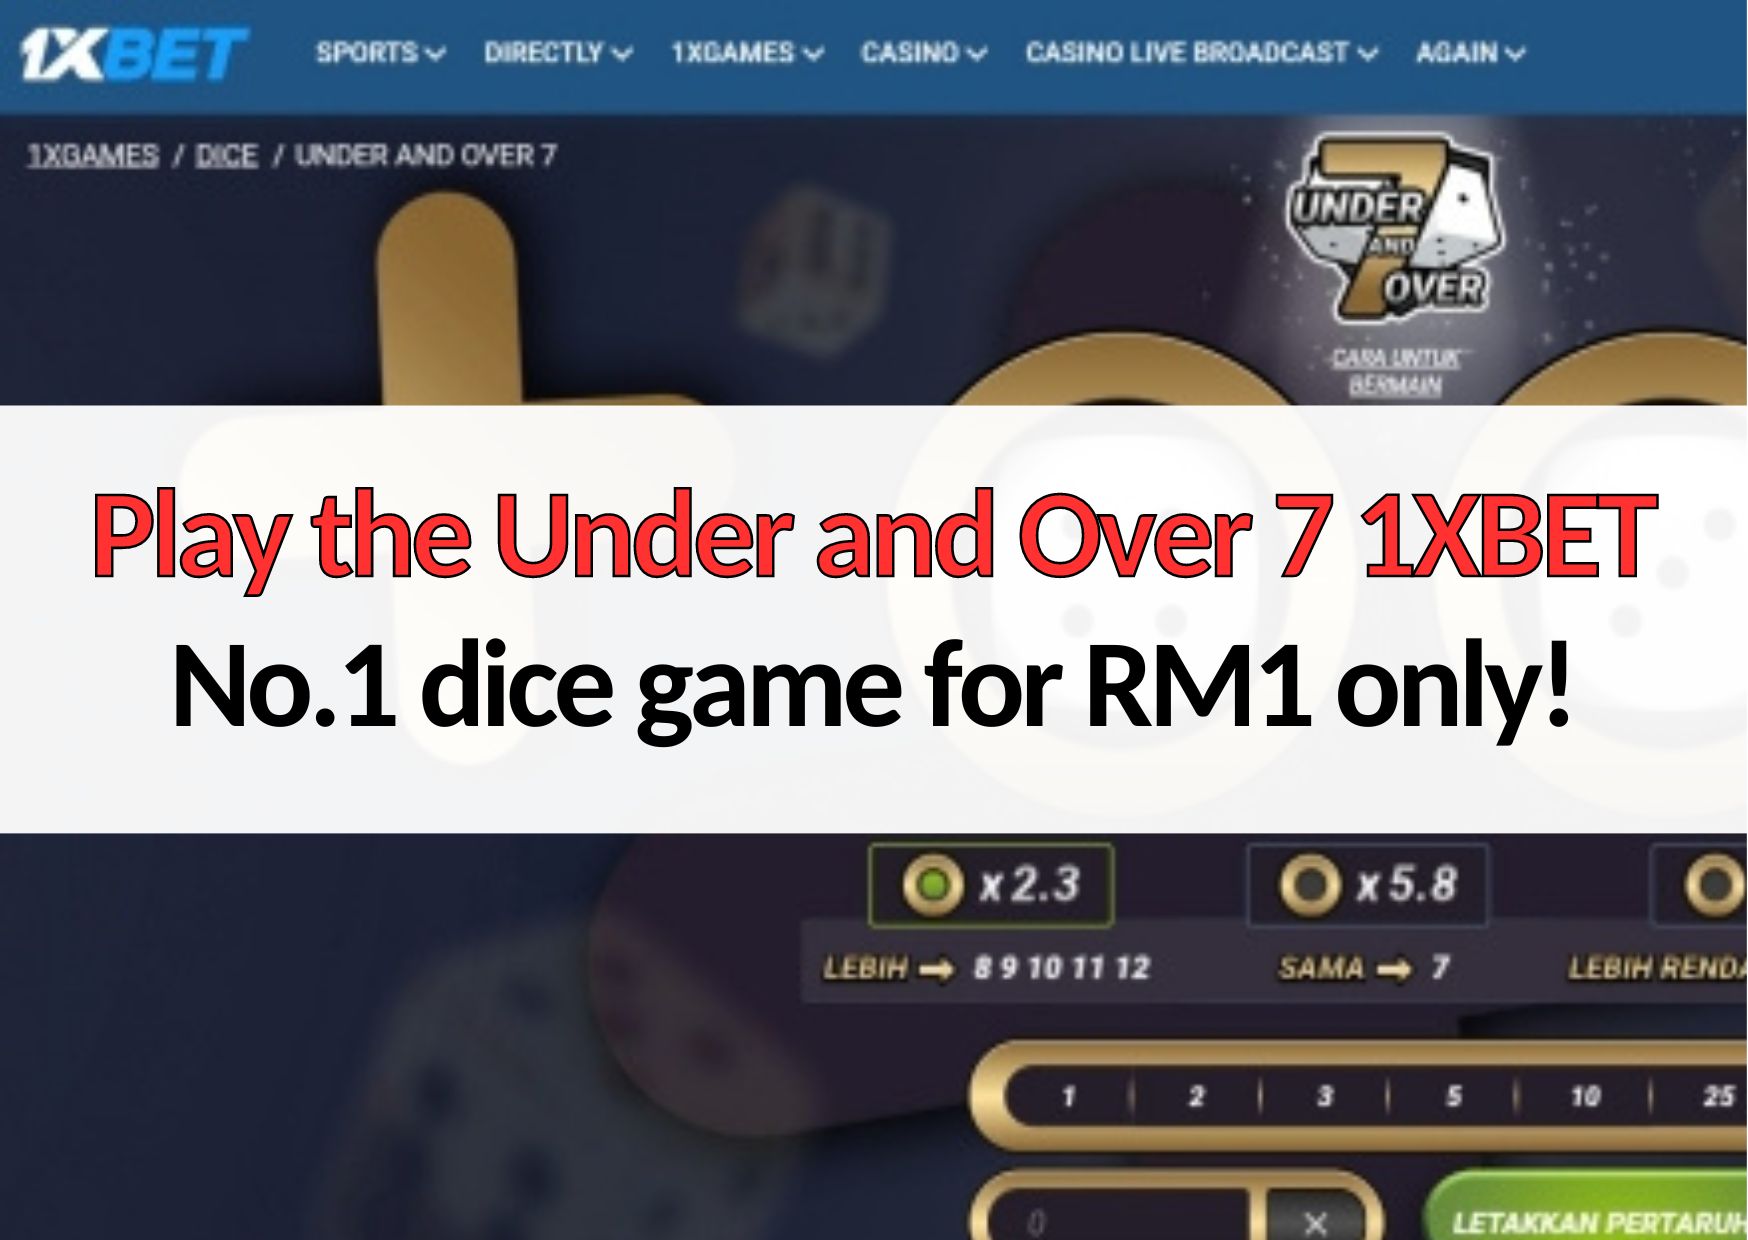 play the under and over 7 1xbet dice game for rm1 only